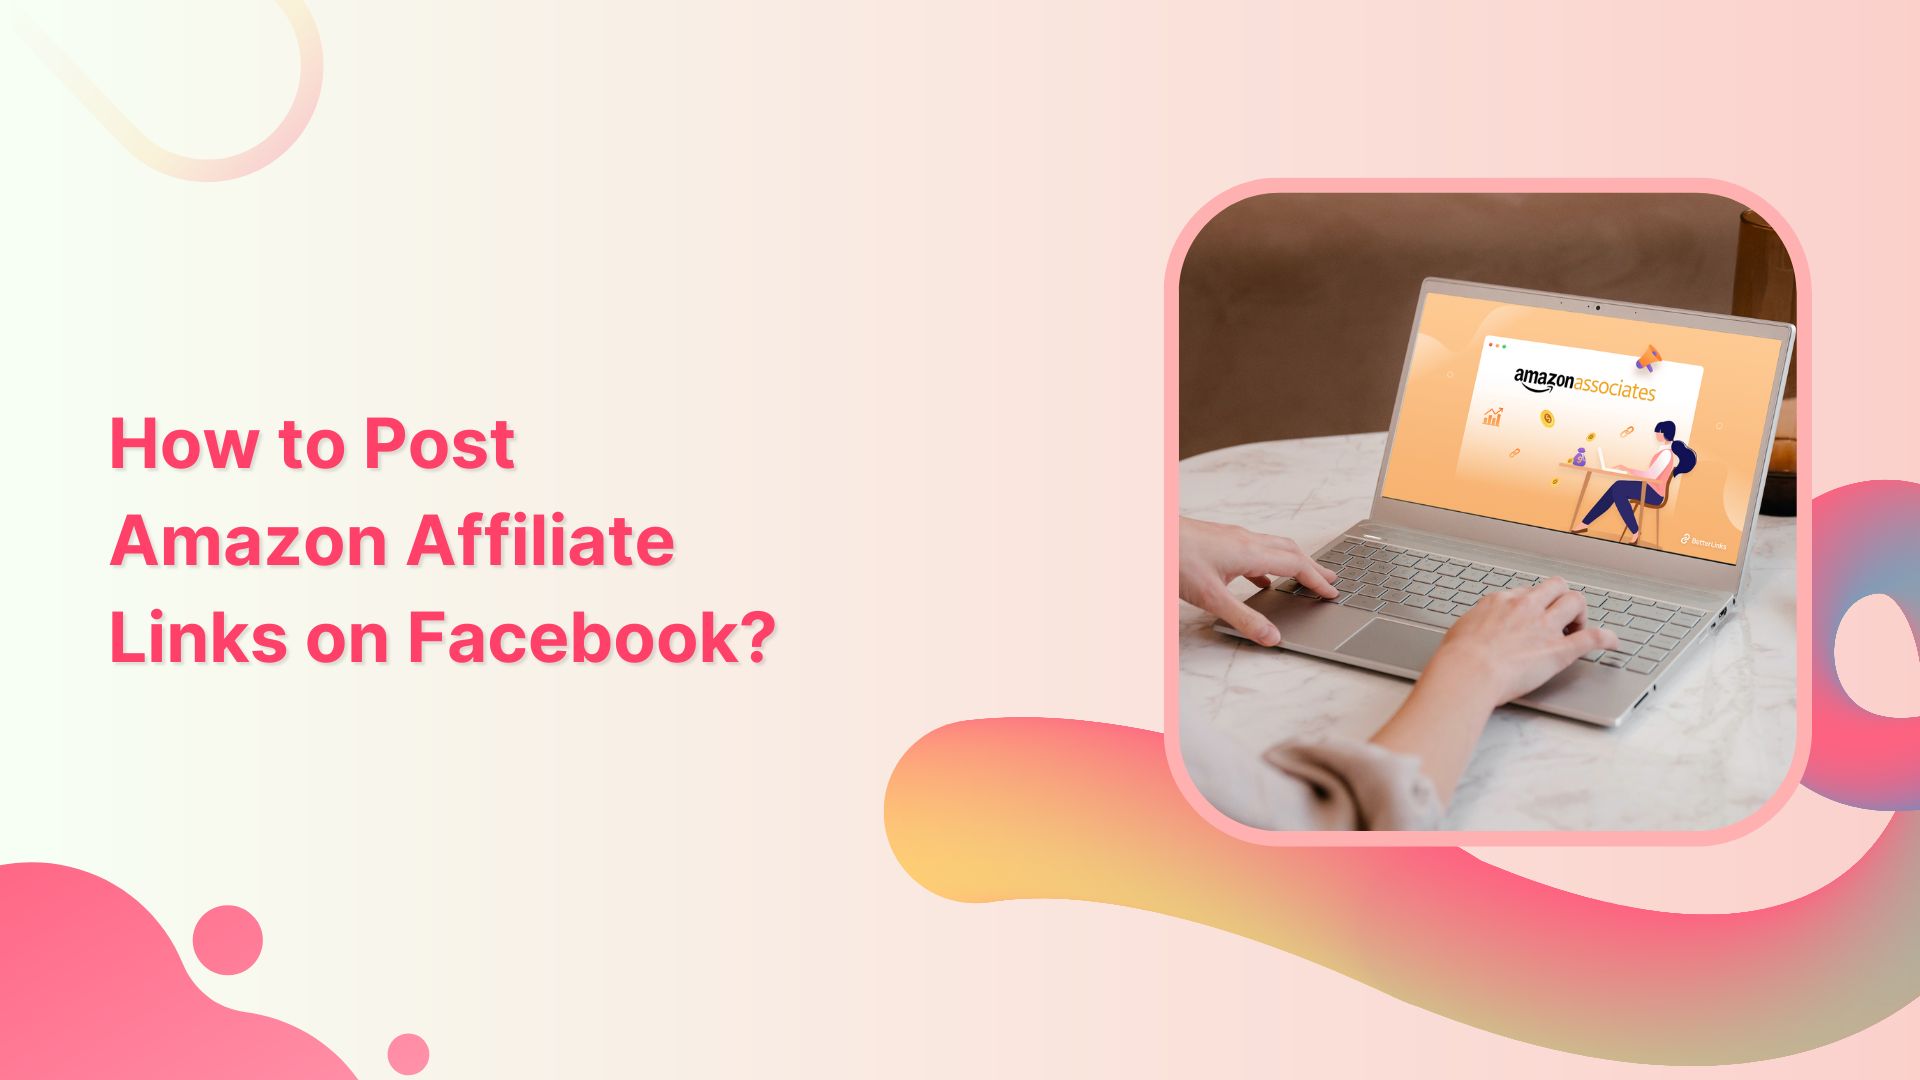 How to Post Amazon Affiliate Links on Facebook?